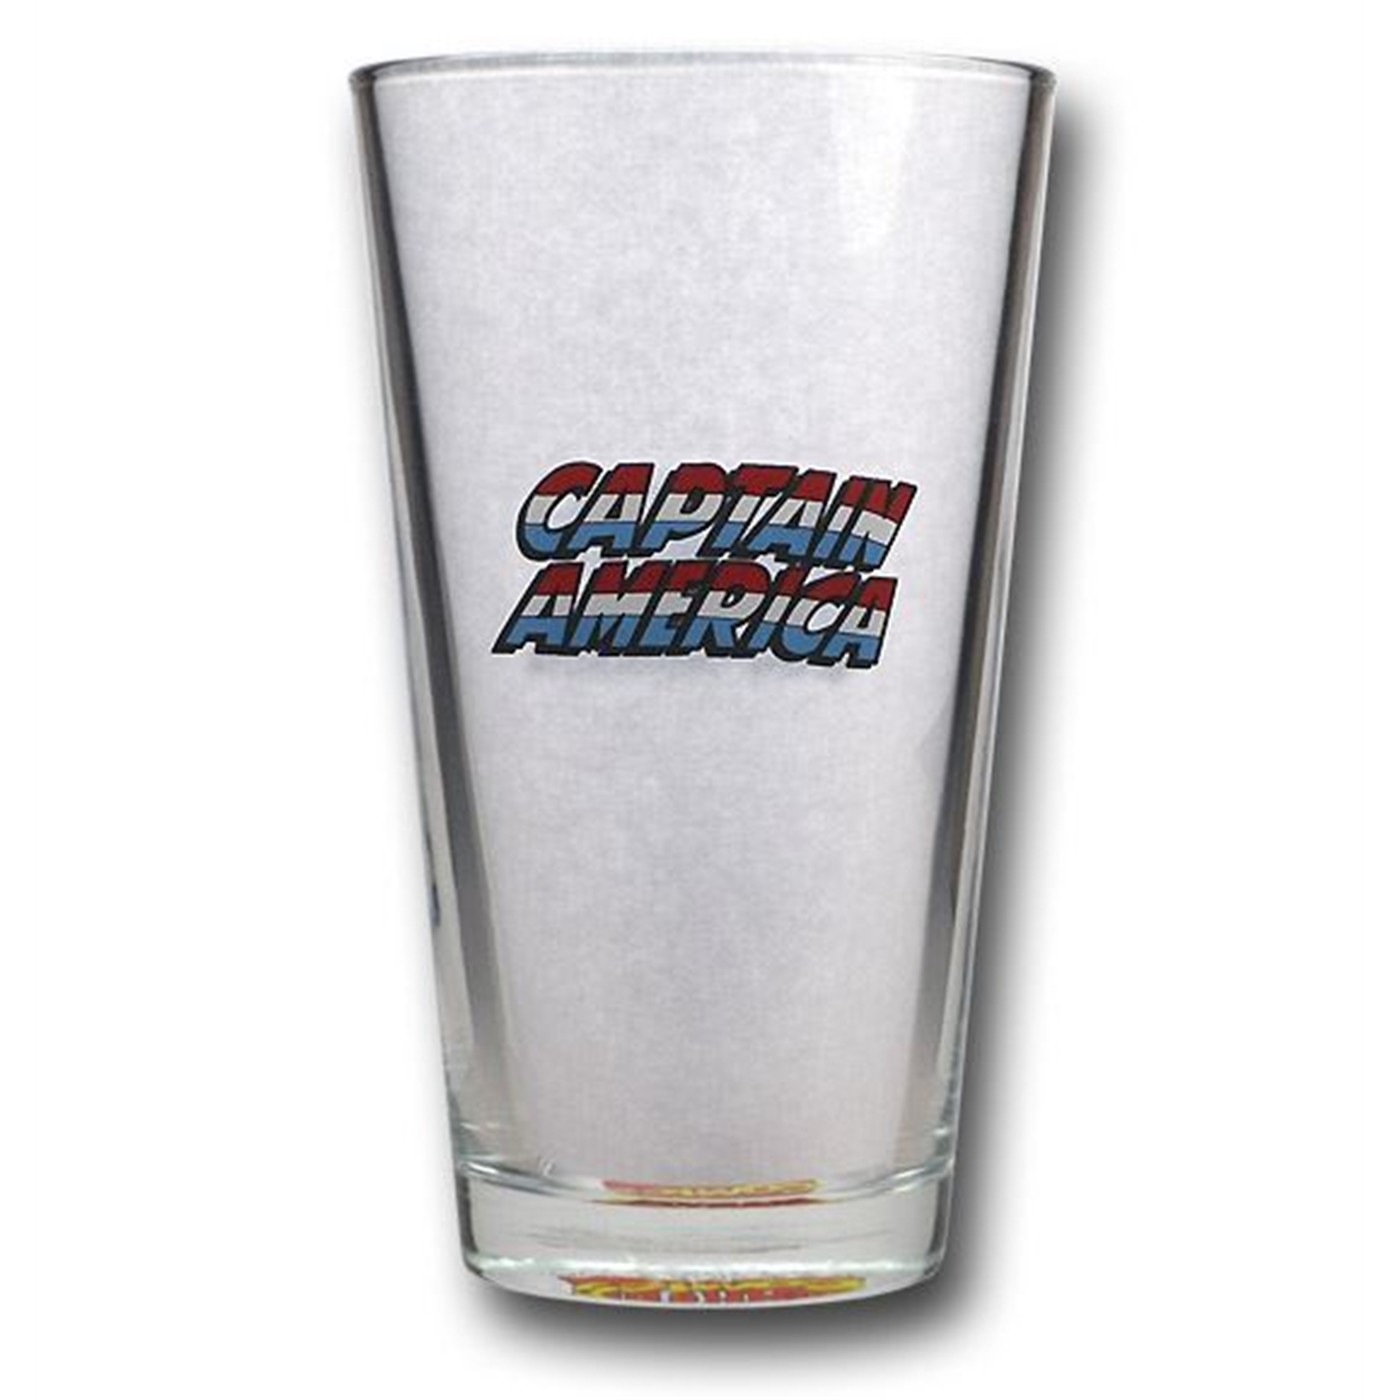 Captain America Determined Charge Pint Glass